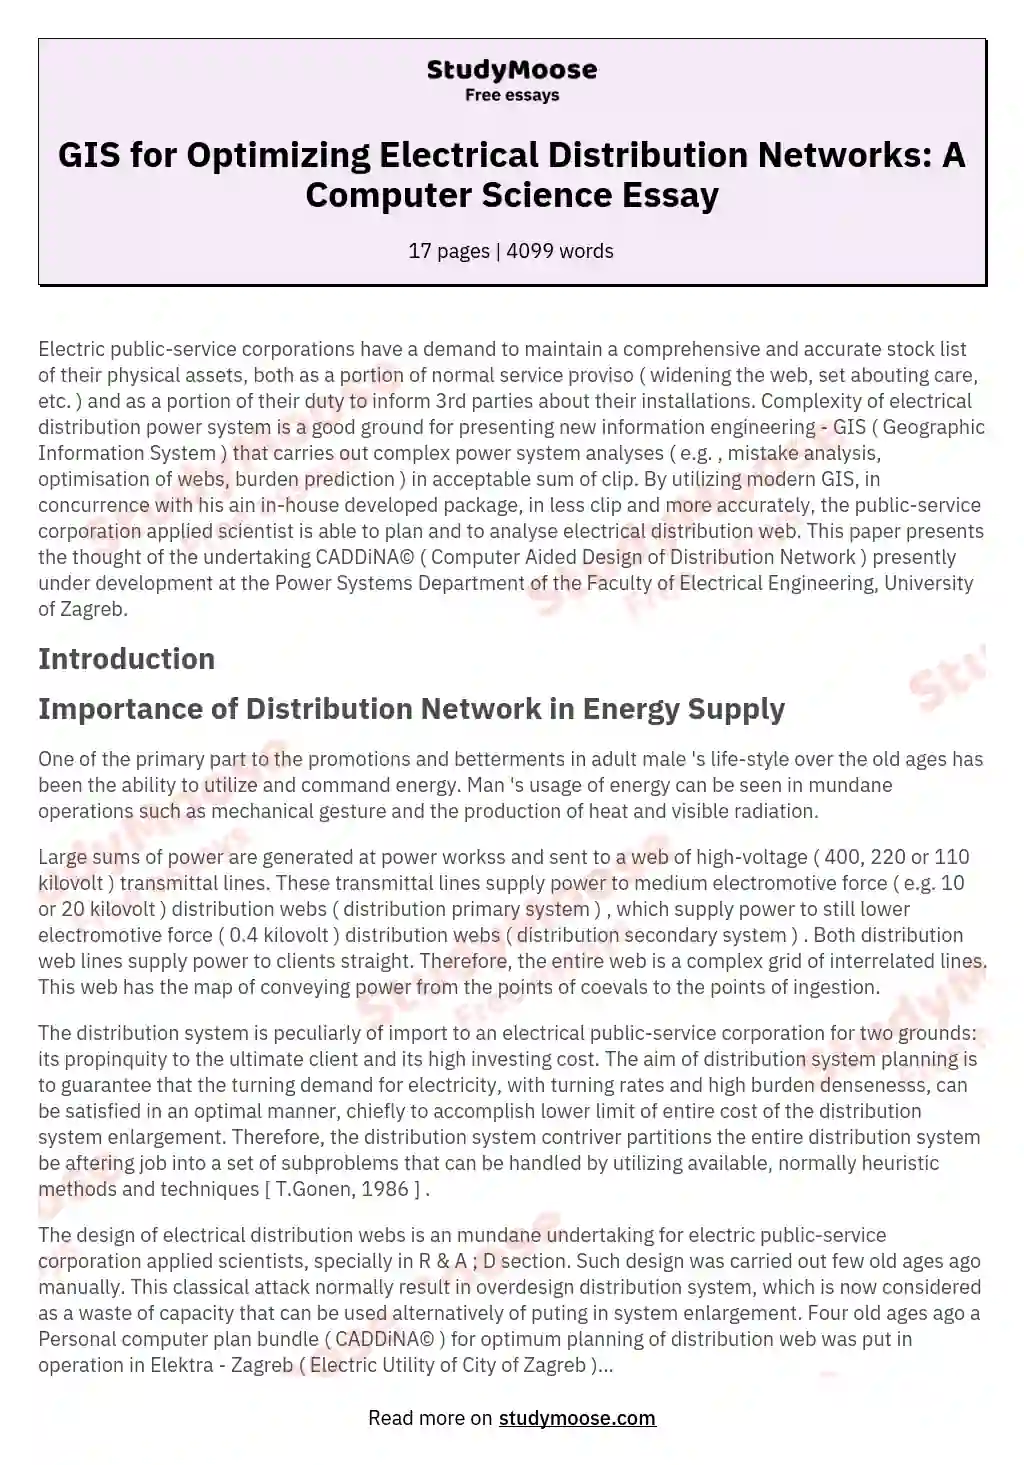 GIS for Optimizing Electrical Distribution Networks: A Computer Science Essay